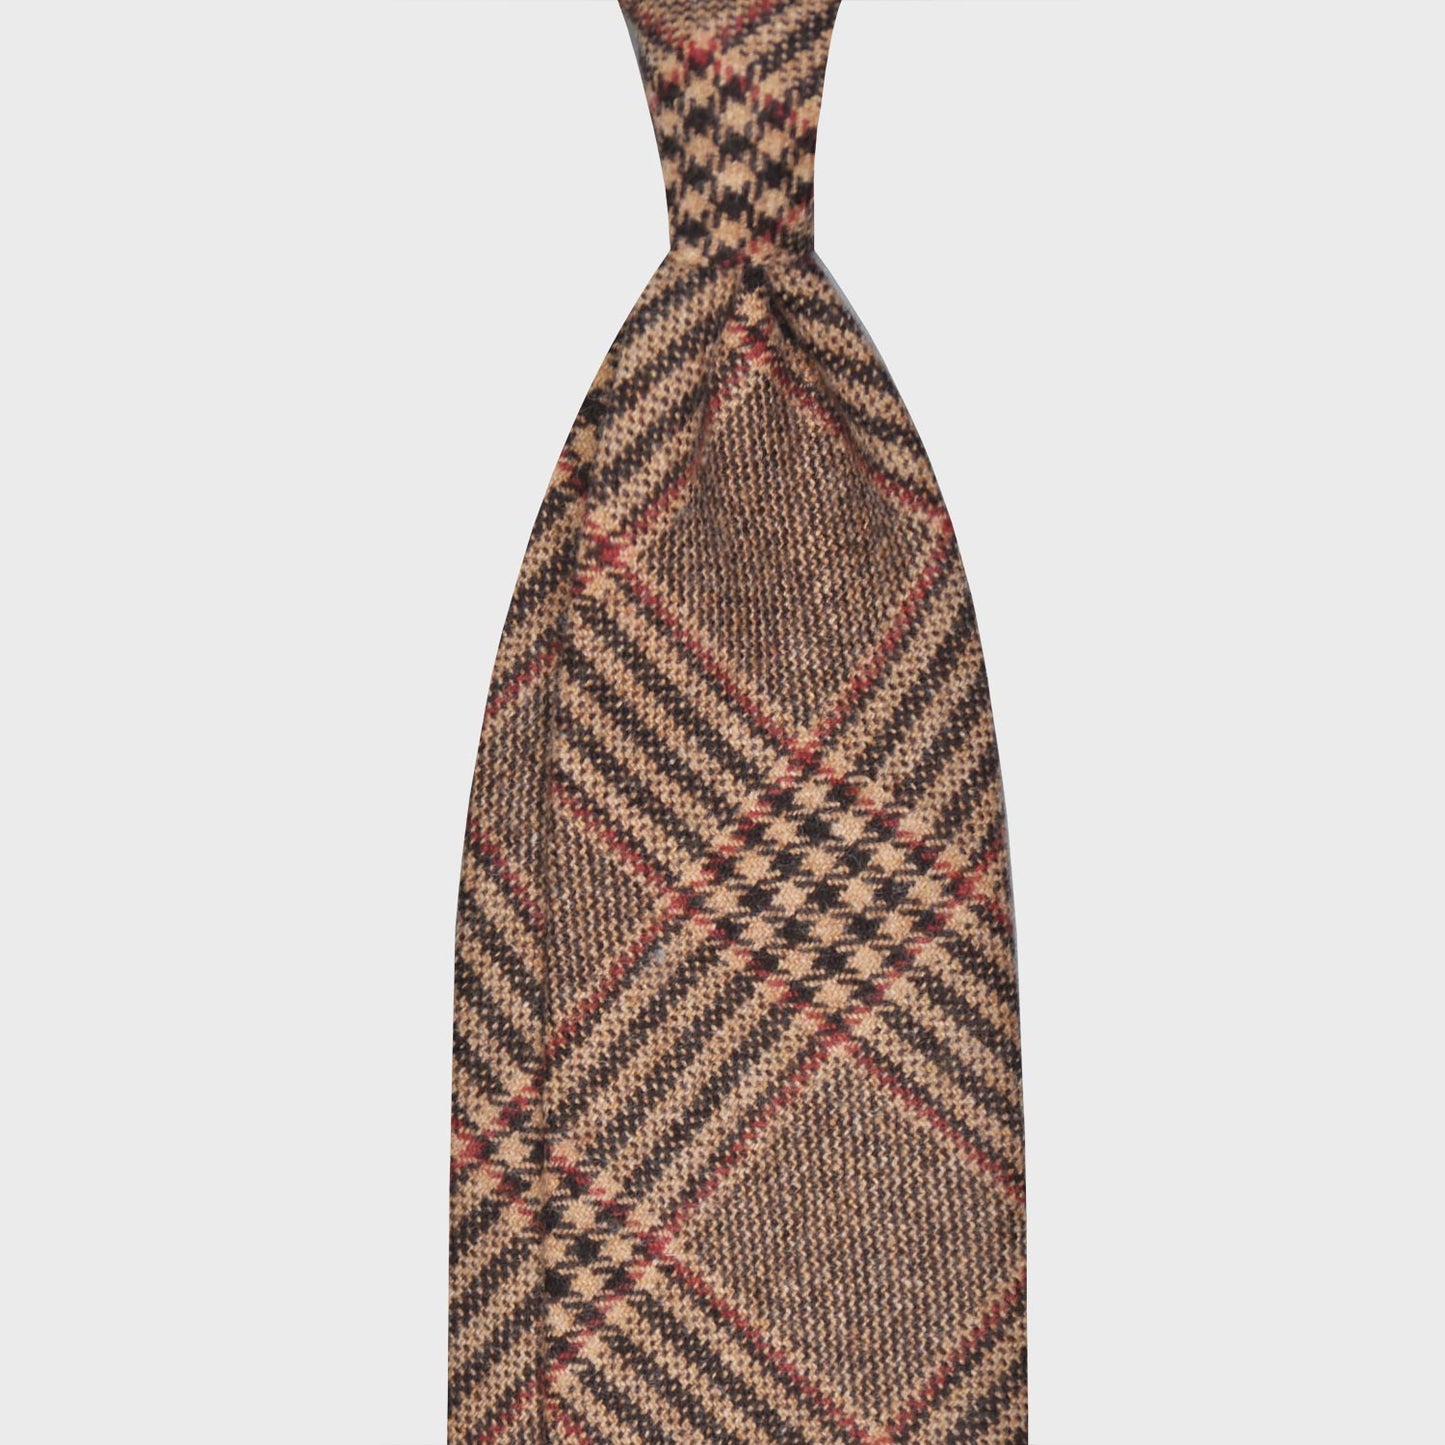 Camel Glen Check Wool Tie Unlined F.Marino Napoli. Glen check wool tie, f marino napoli for Wools Boutique Uomo, camel and red Prince of Wales pattern, handmade unlined tie 3 folds, ideal for outfits in the 3 seasons autumn to spring